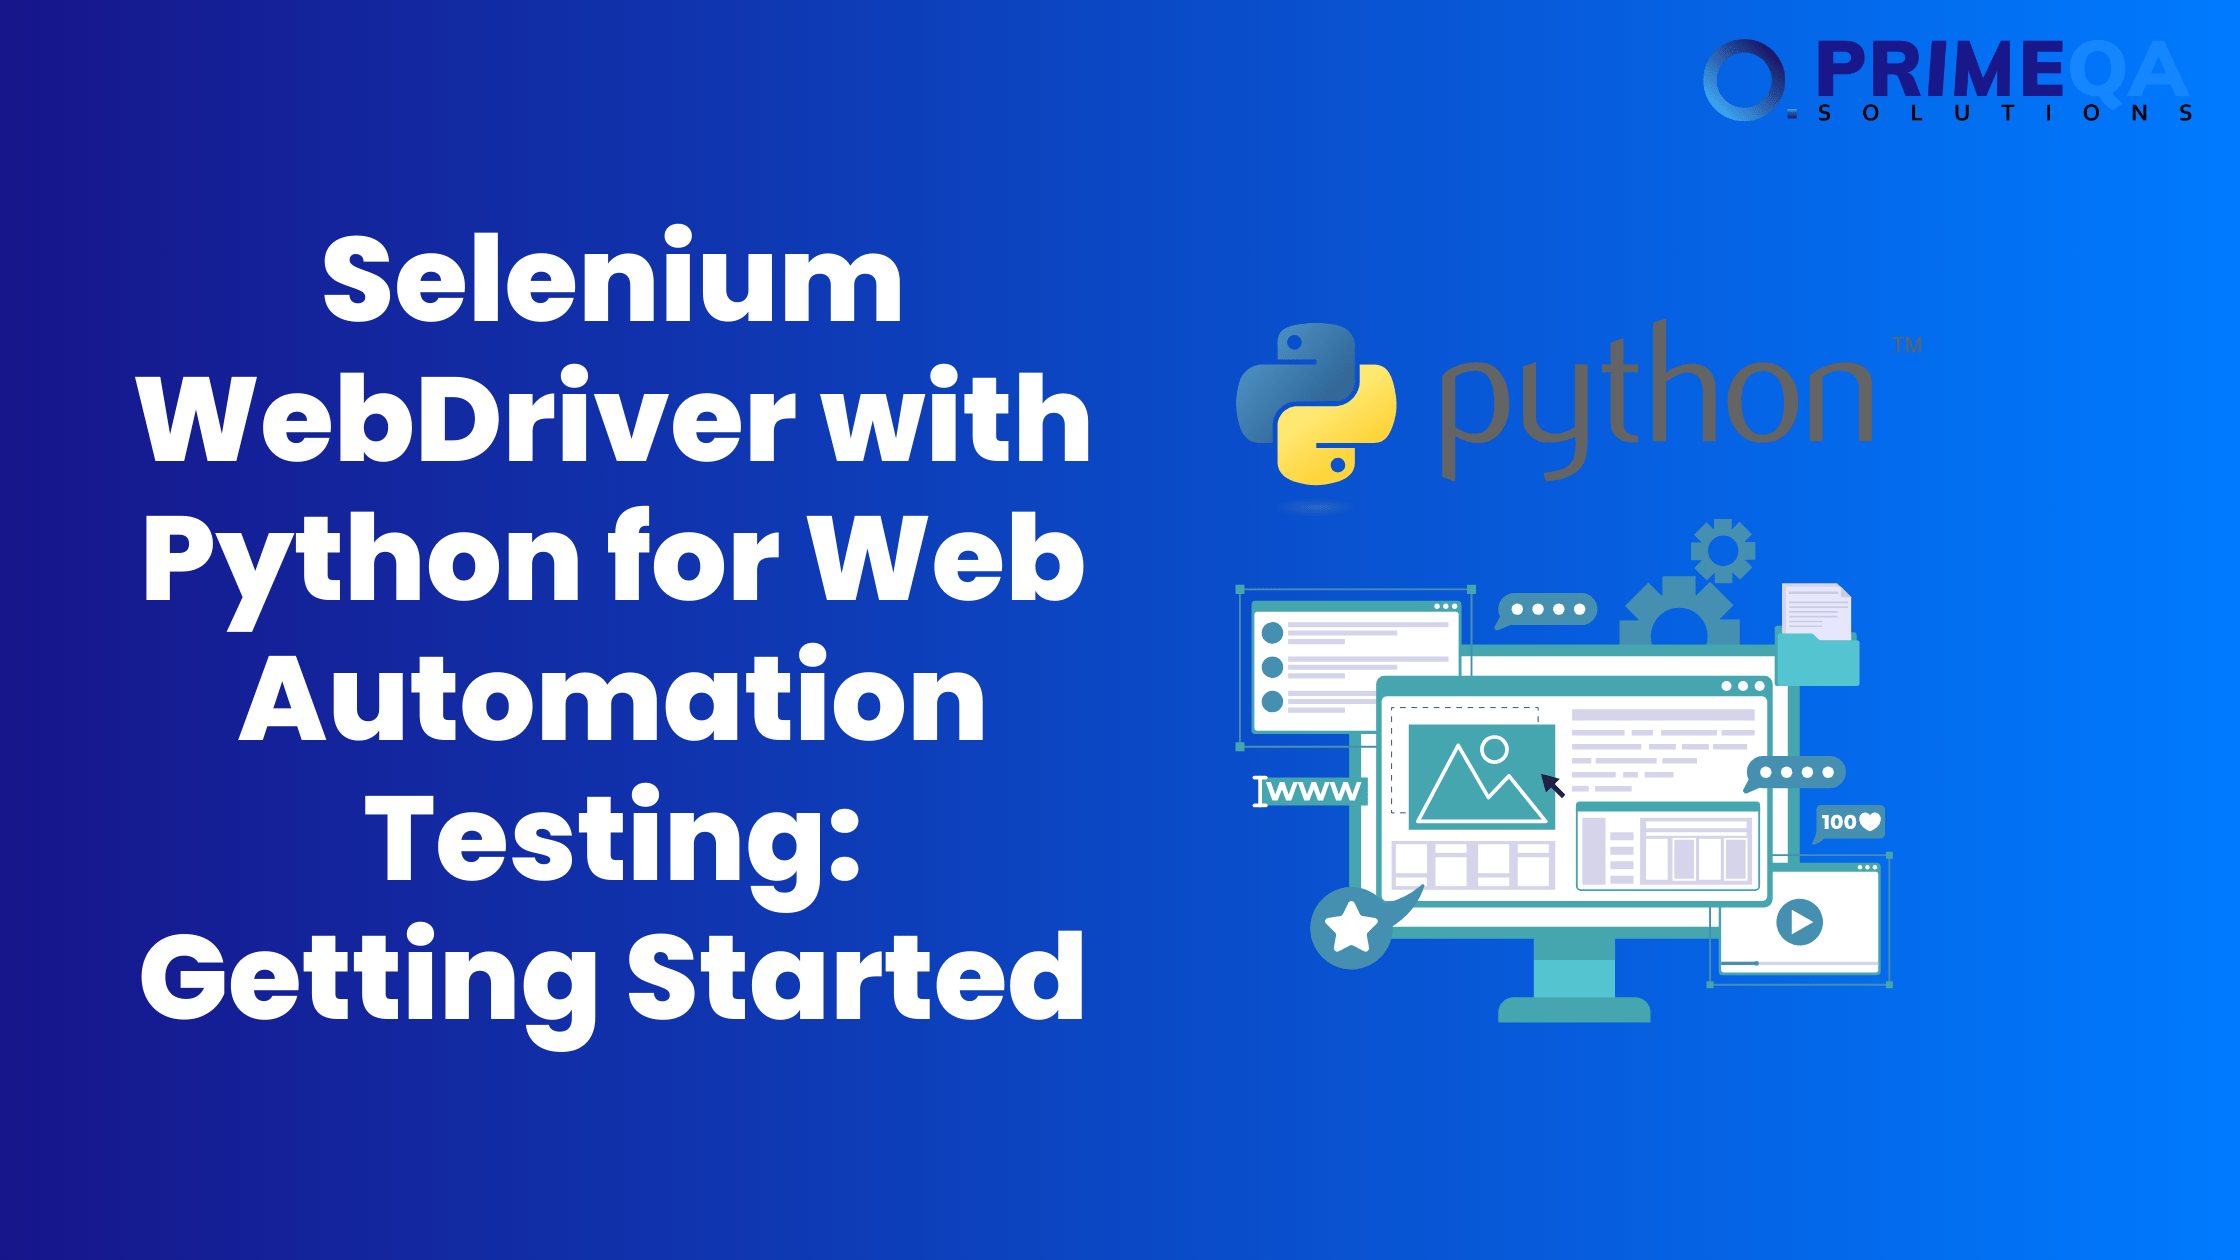 Selenium WebDriver with Python for Web Automation Testing